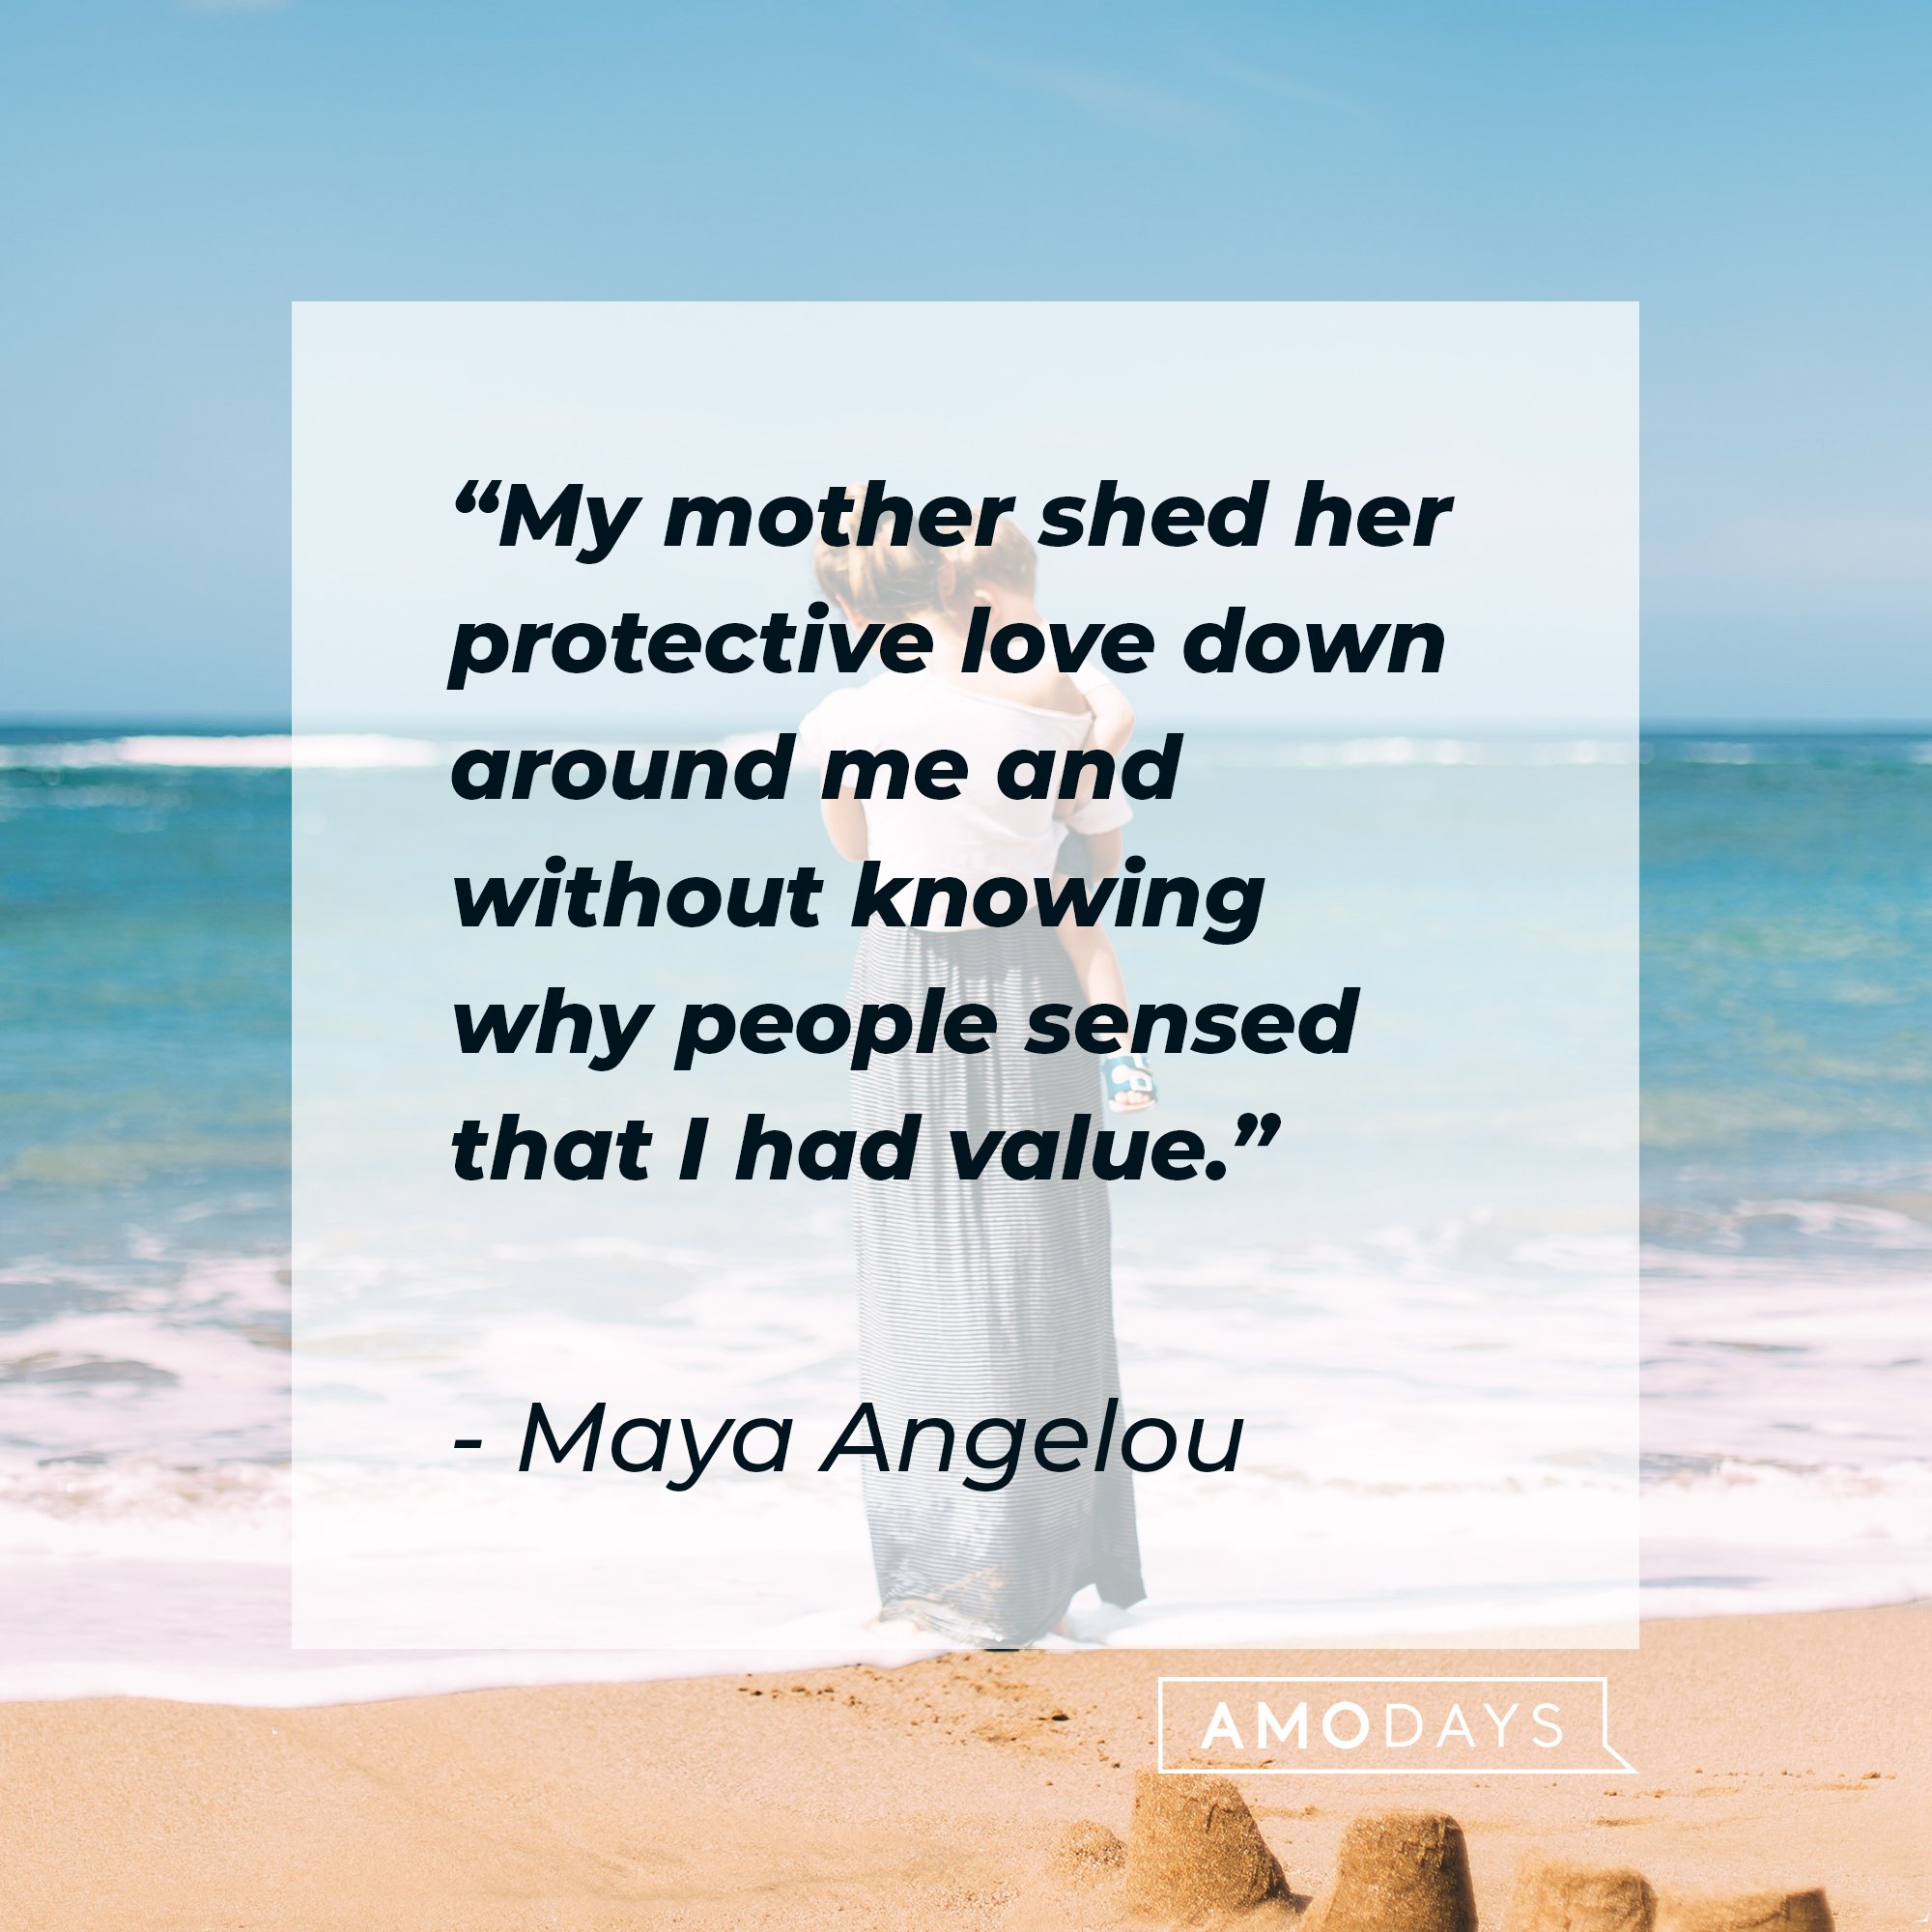 Maya Angelou's quote: "My mother shed her protective love down around me and without knowing why people sensed that I had value." | Image: AmoDays